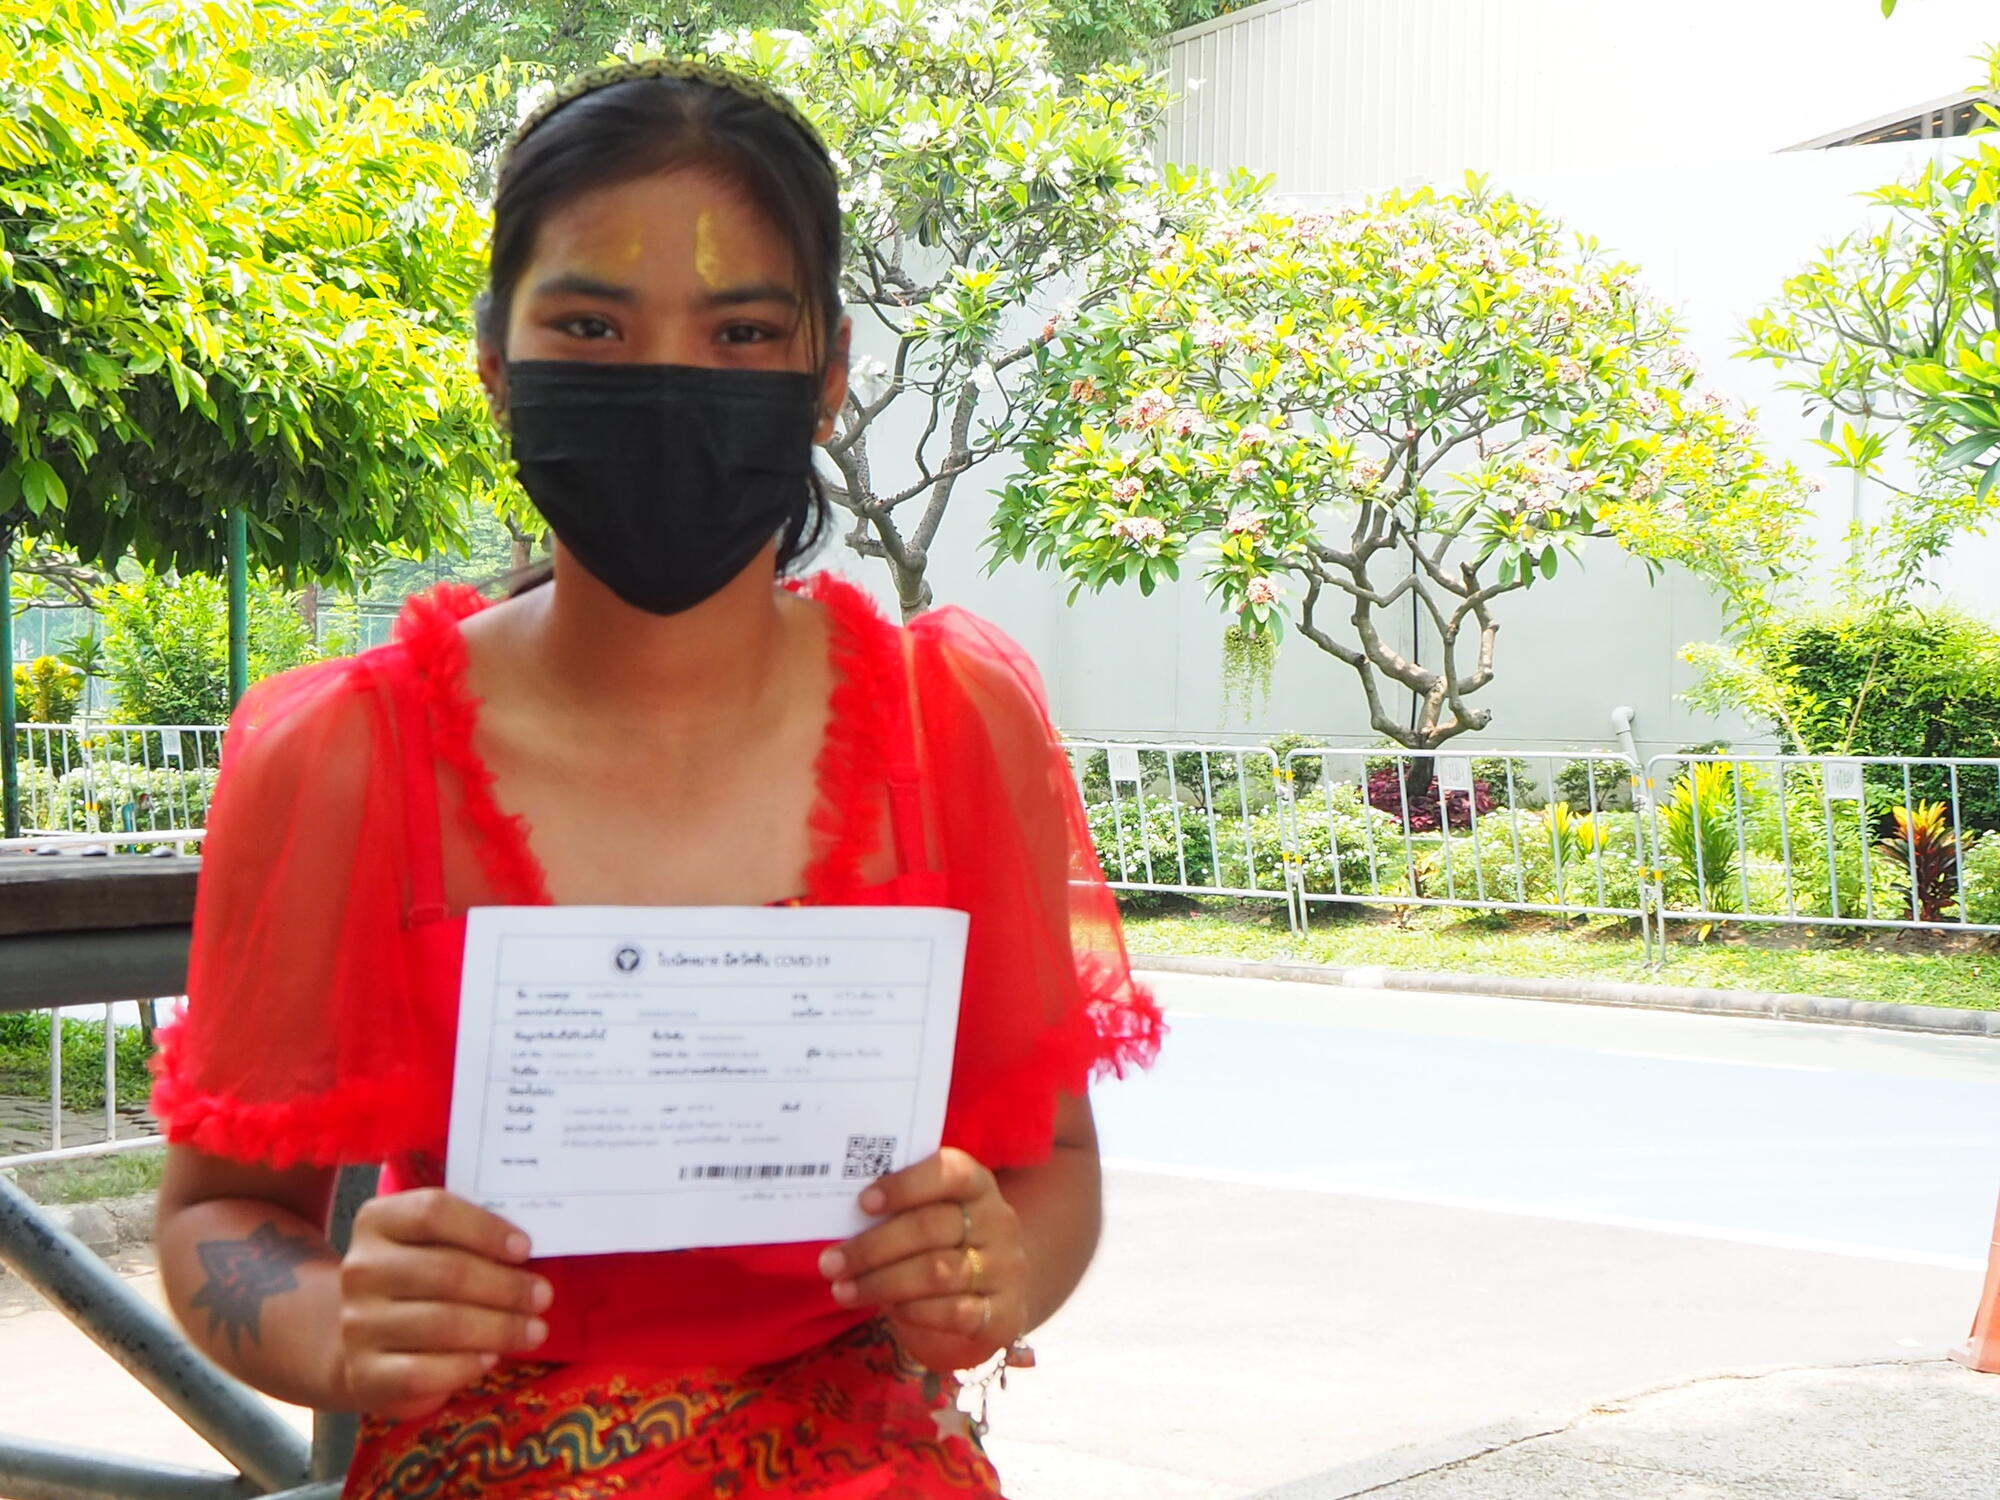 A Myanmar migrant worker who has received COVID-19 knowledge and vaccine as suggested